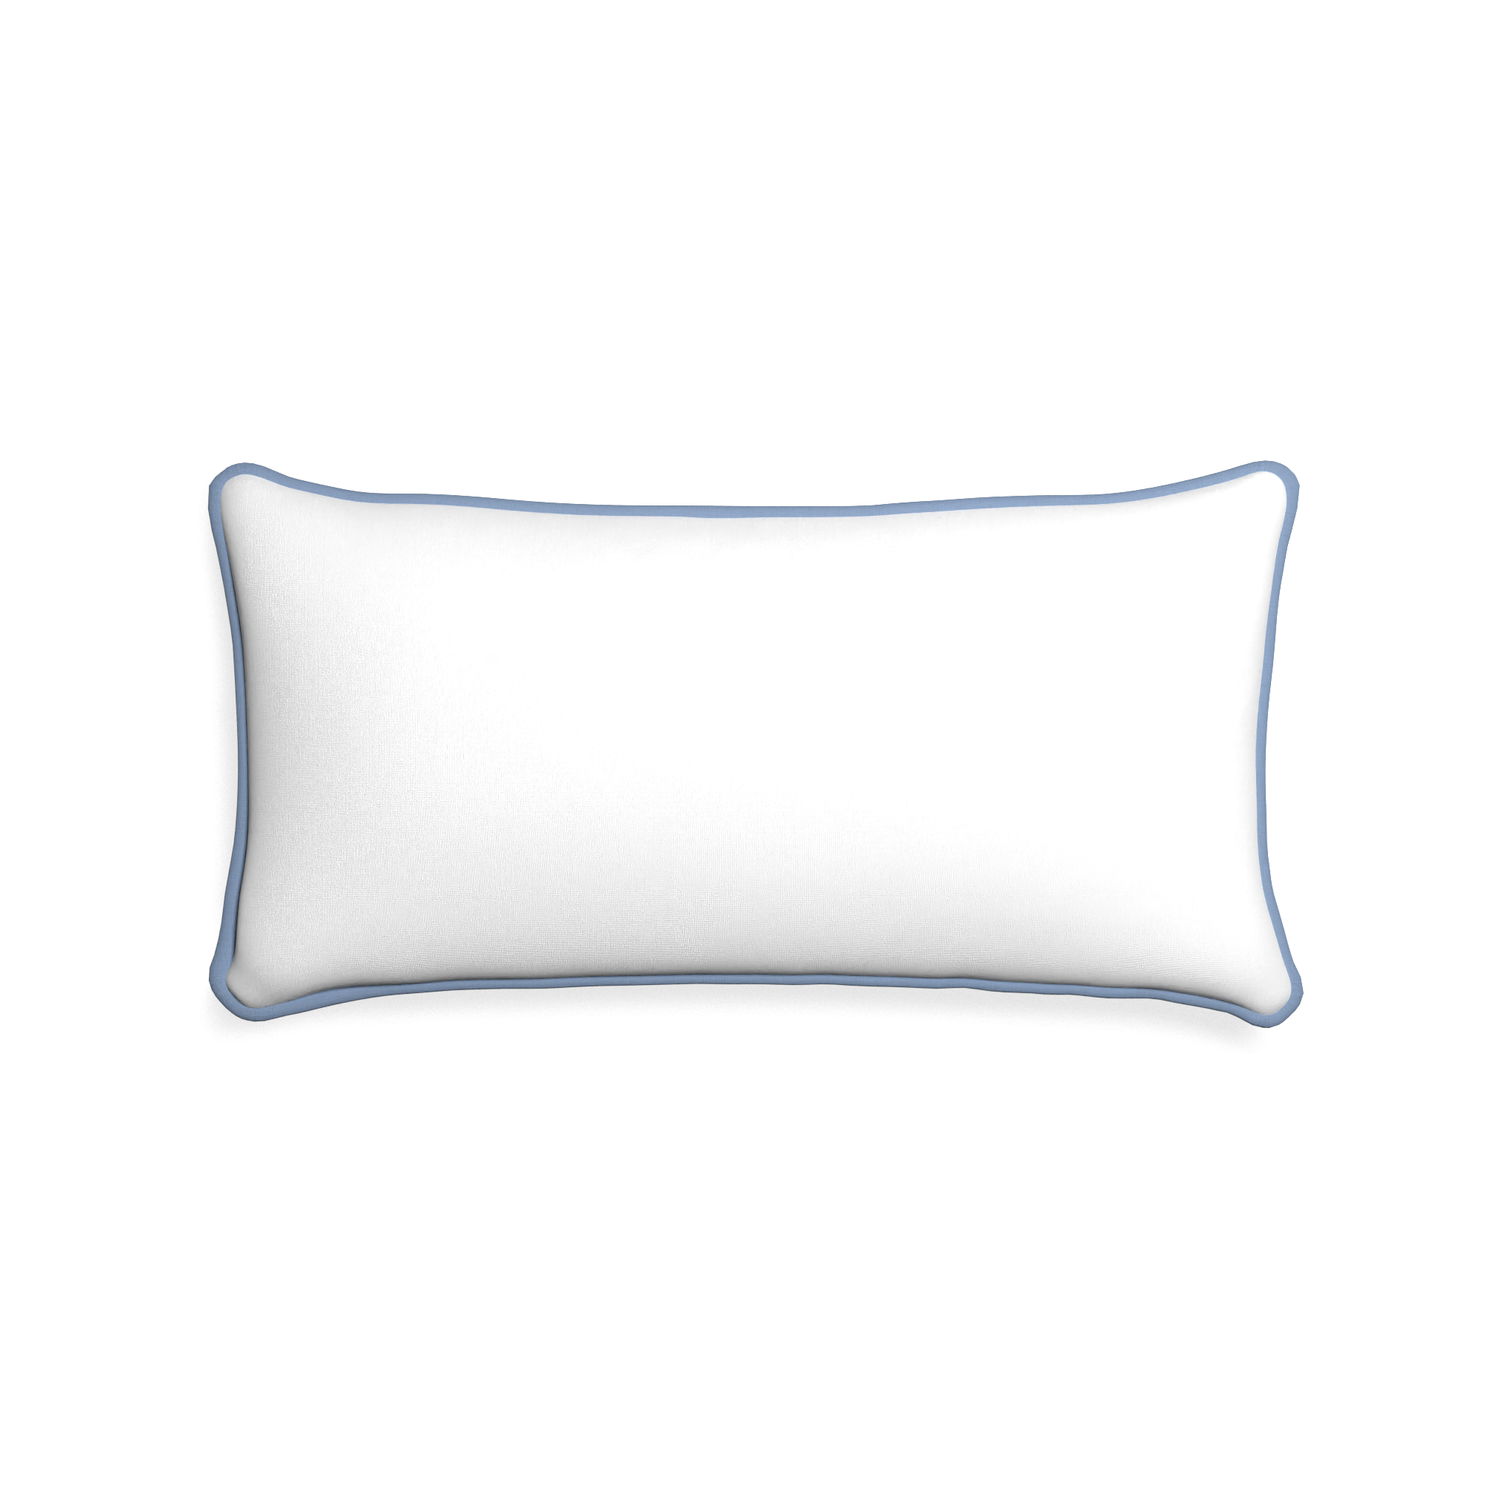 Midi-lumbar snow custom white cottonpillow with sky piping on white background